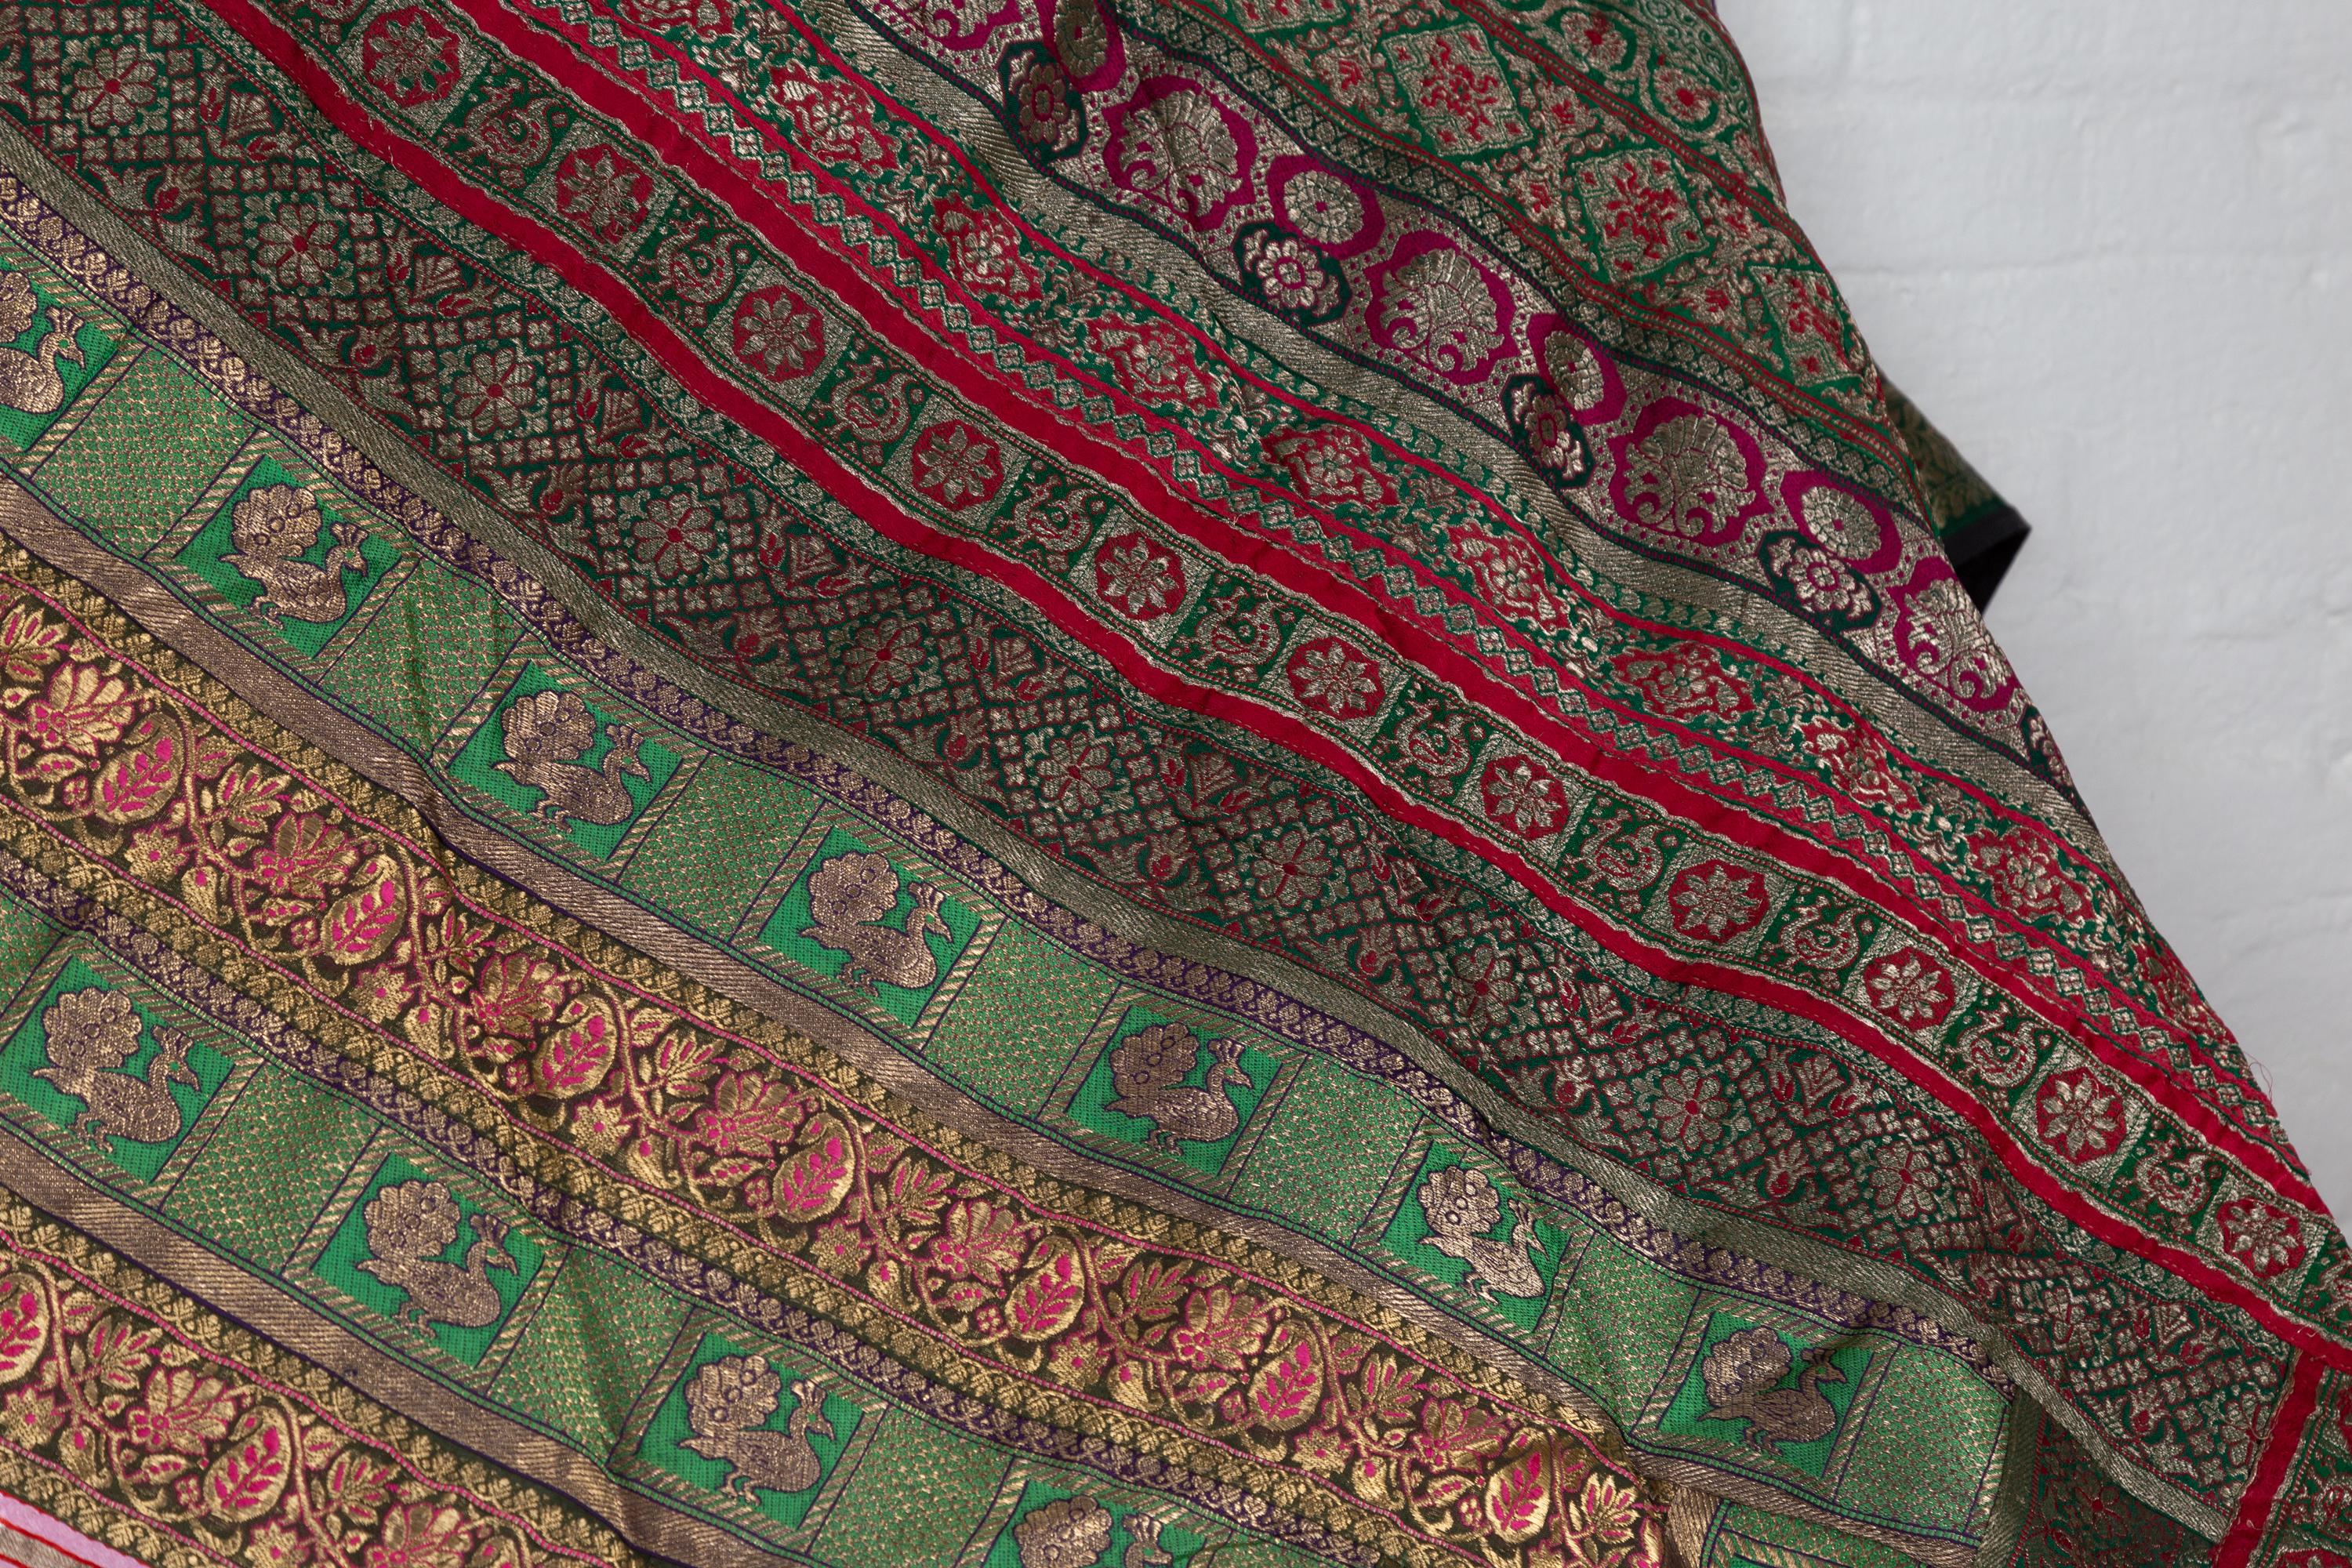 20th Century Vintage Indian Silk Embroidered Fabric with Green, Red, Fuchsia and Golden Tones